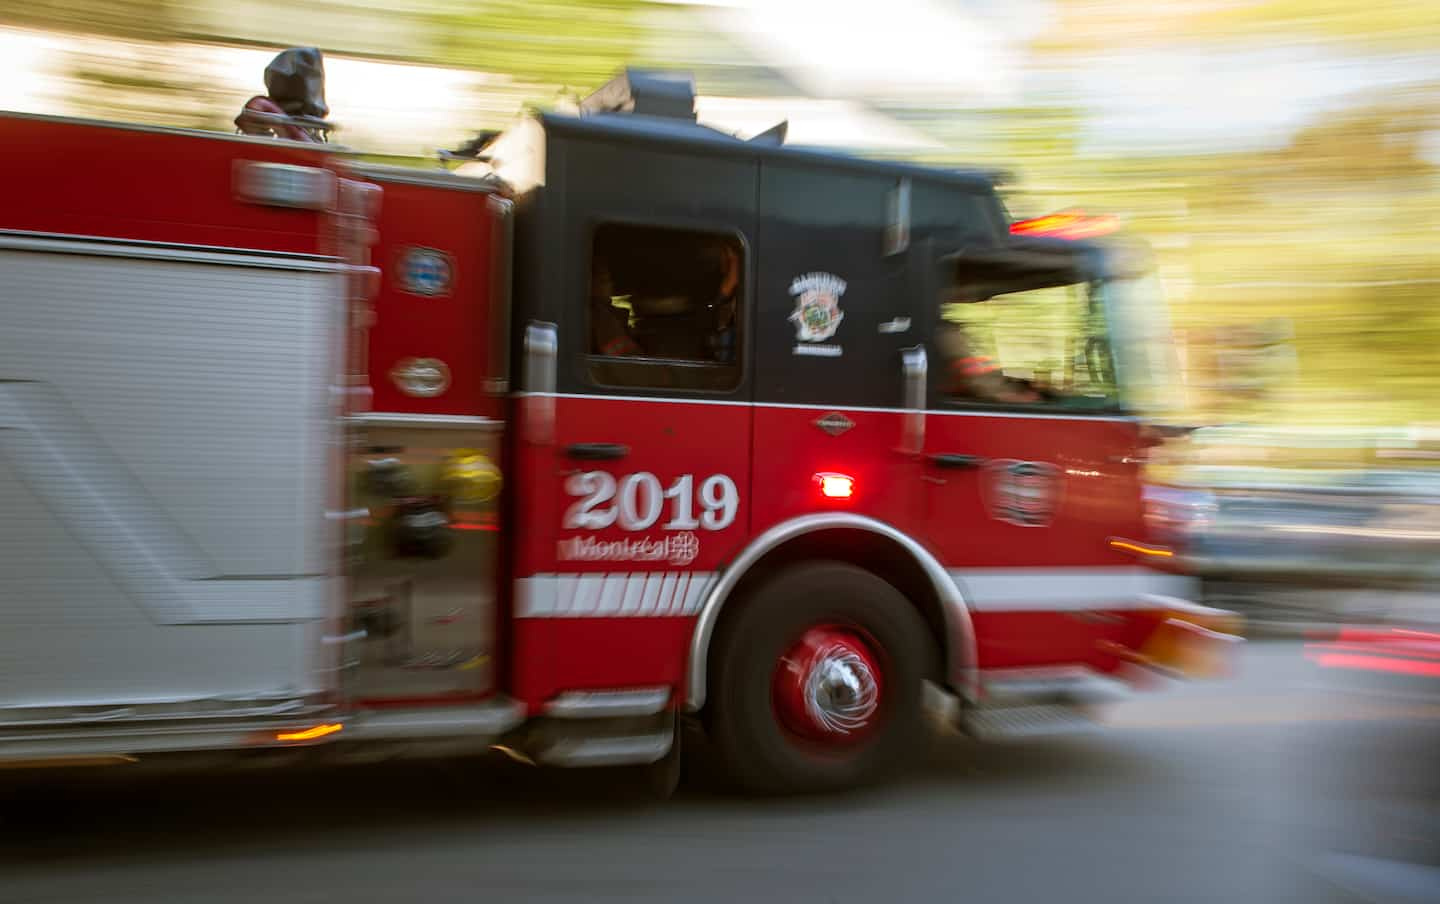 Fire in Dollard-des-Ormeaux: one person treated for smoke inhalation